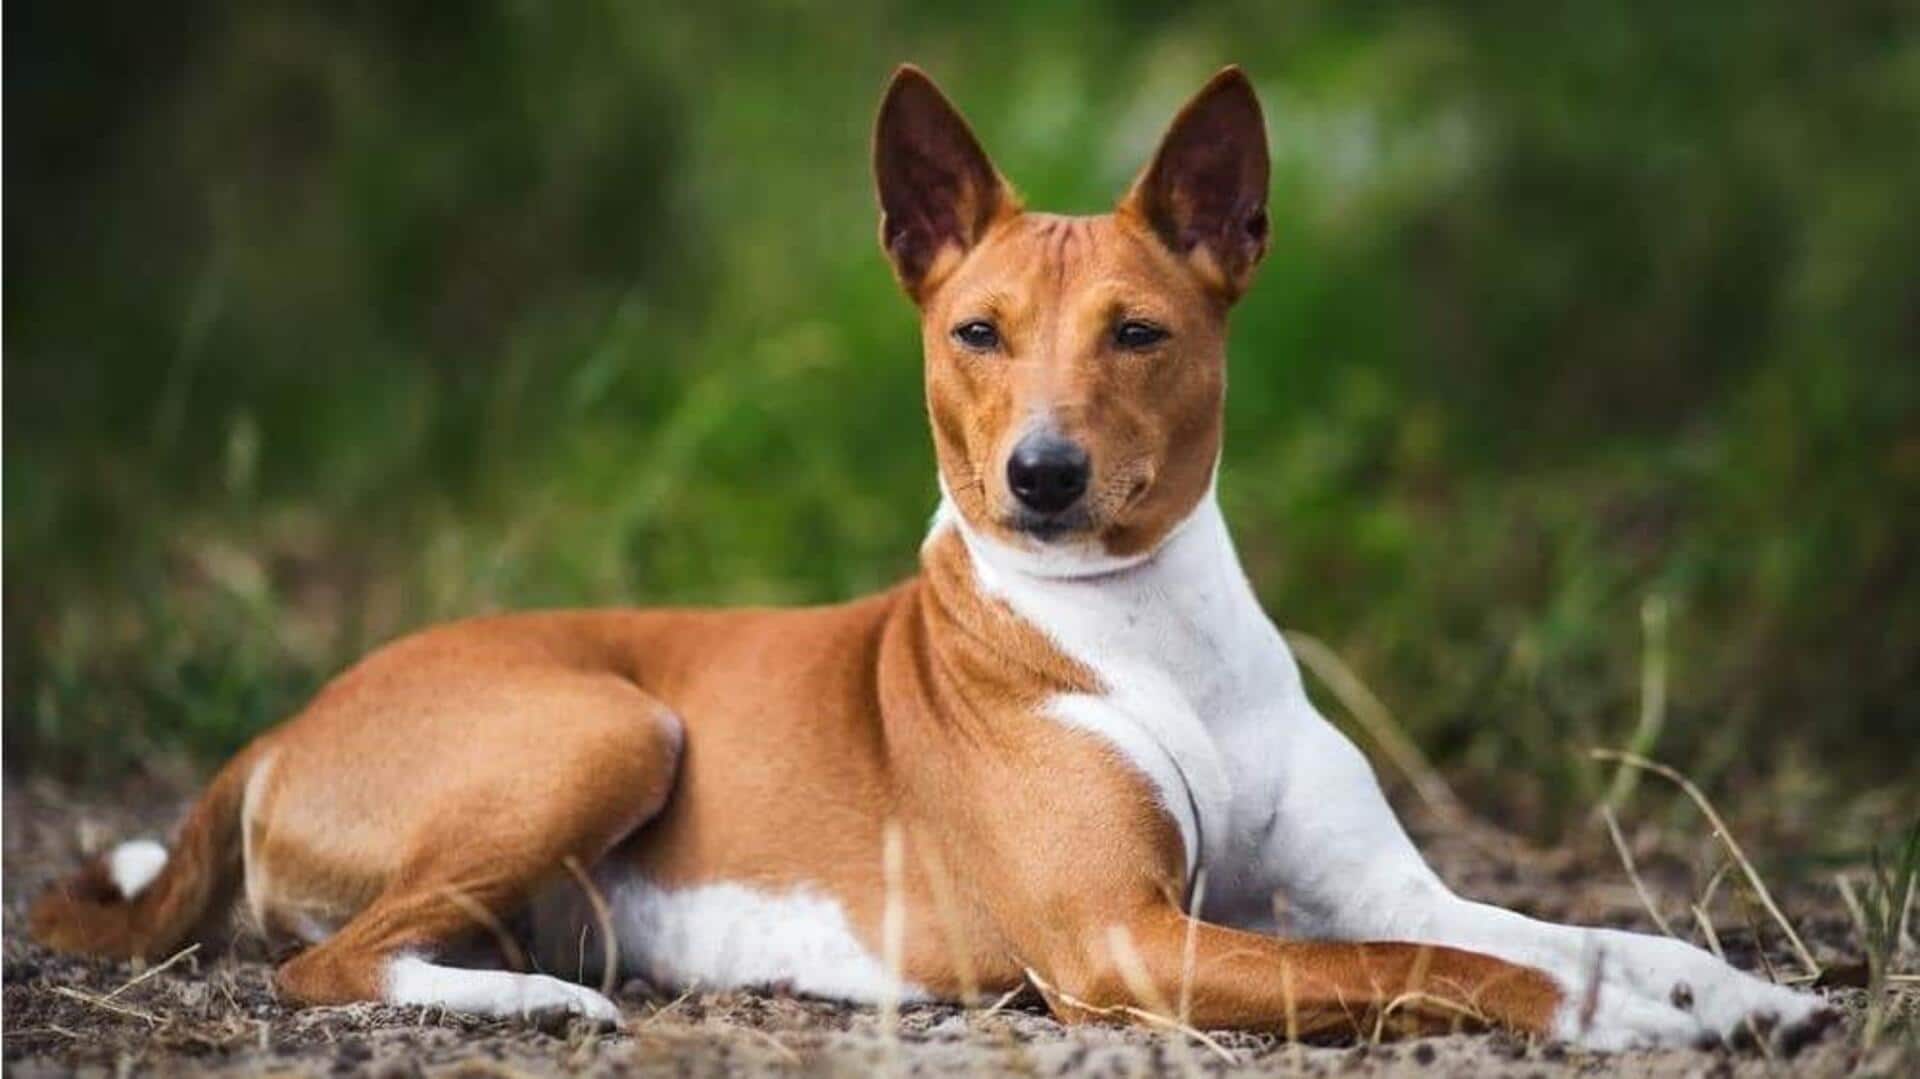 Basenji dog's grooming and care essentials